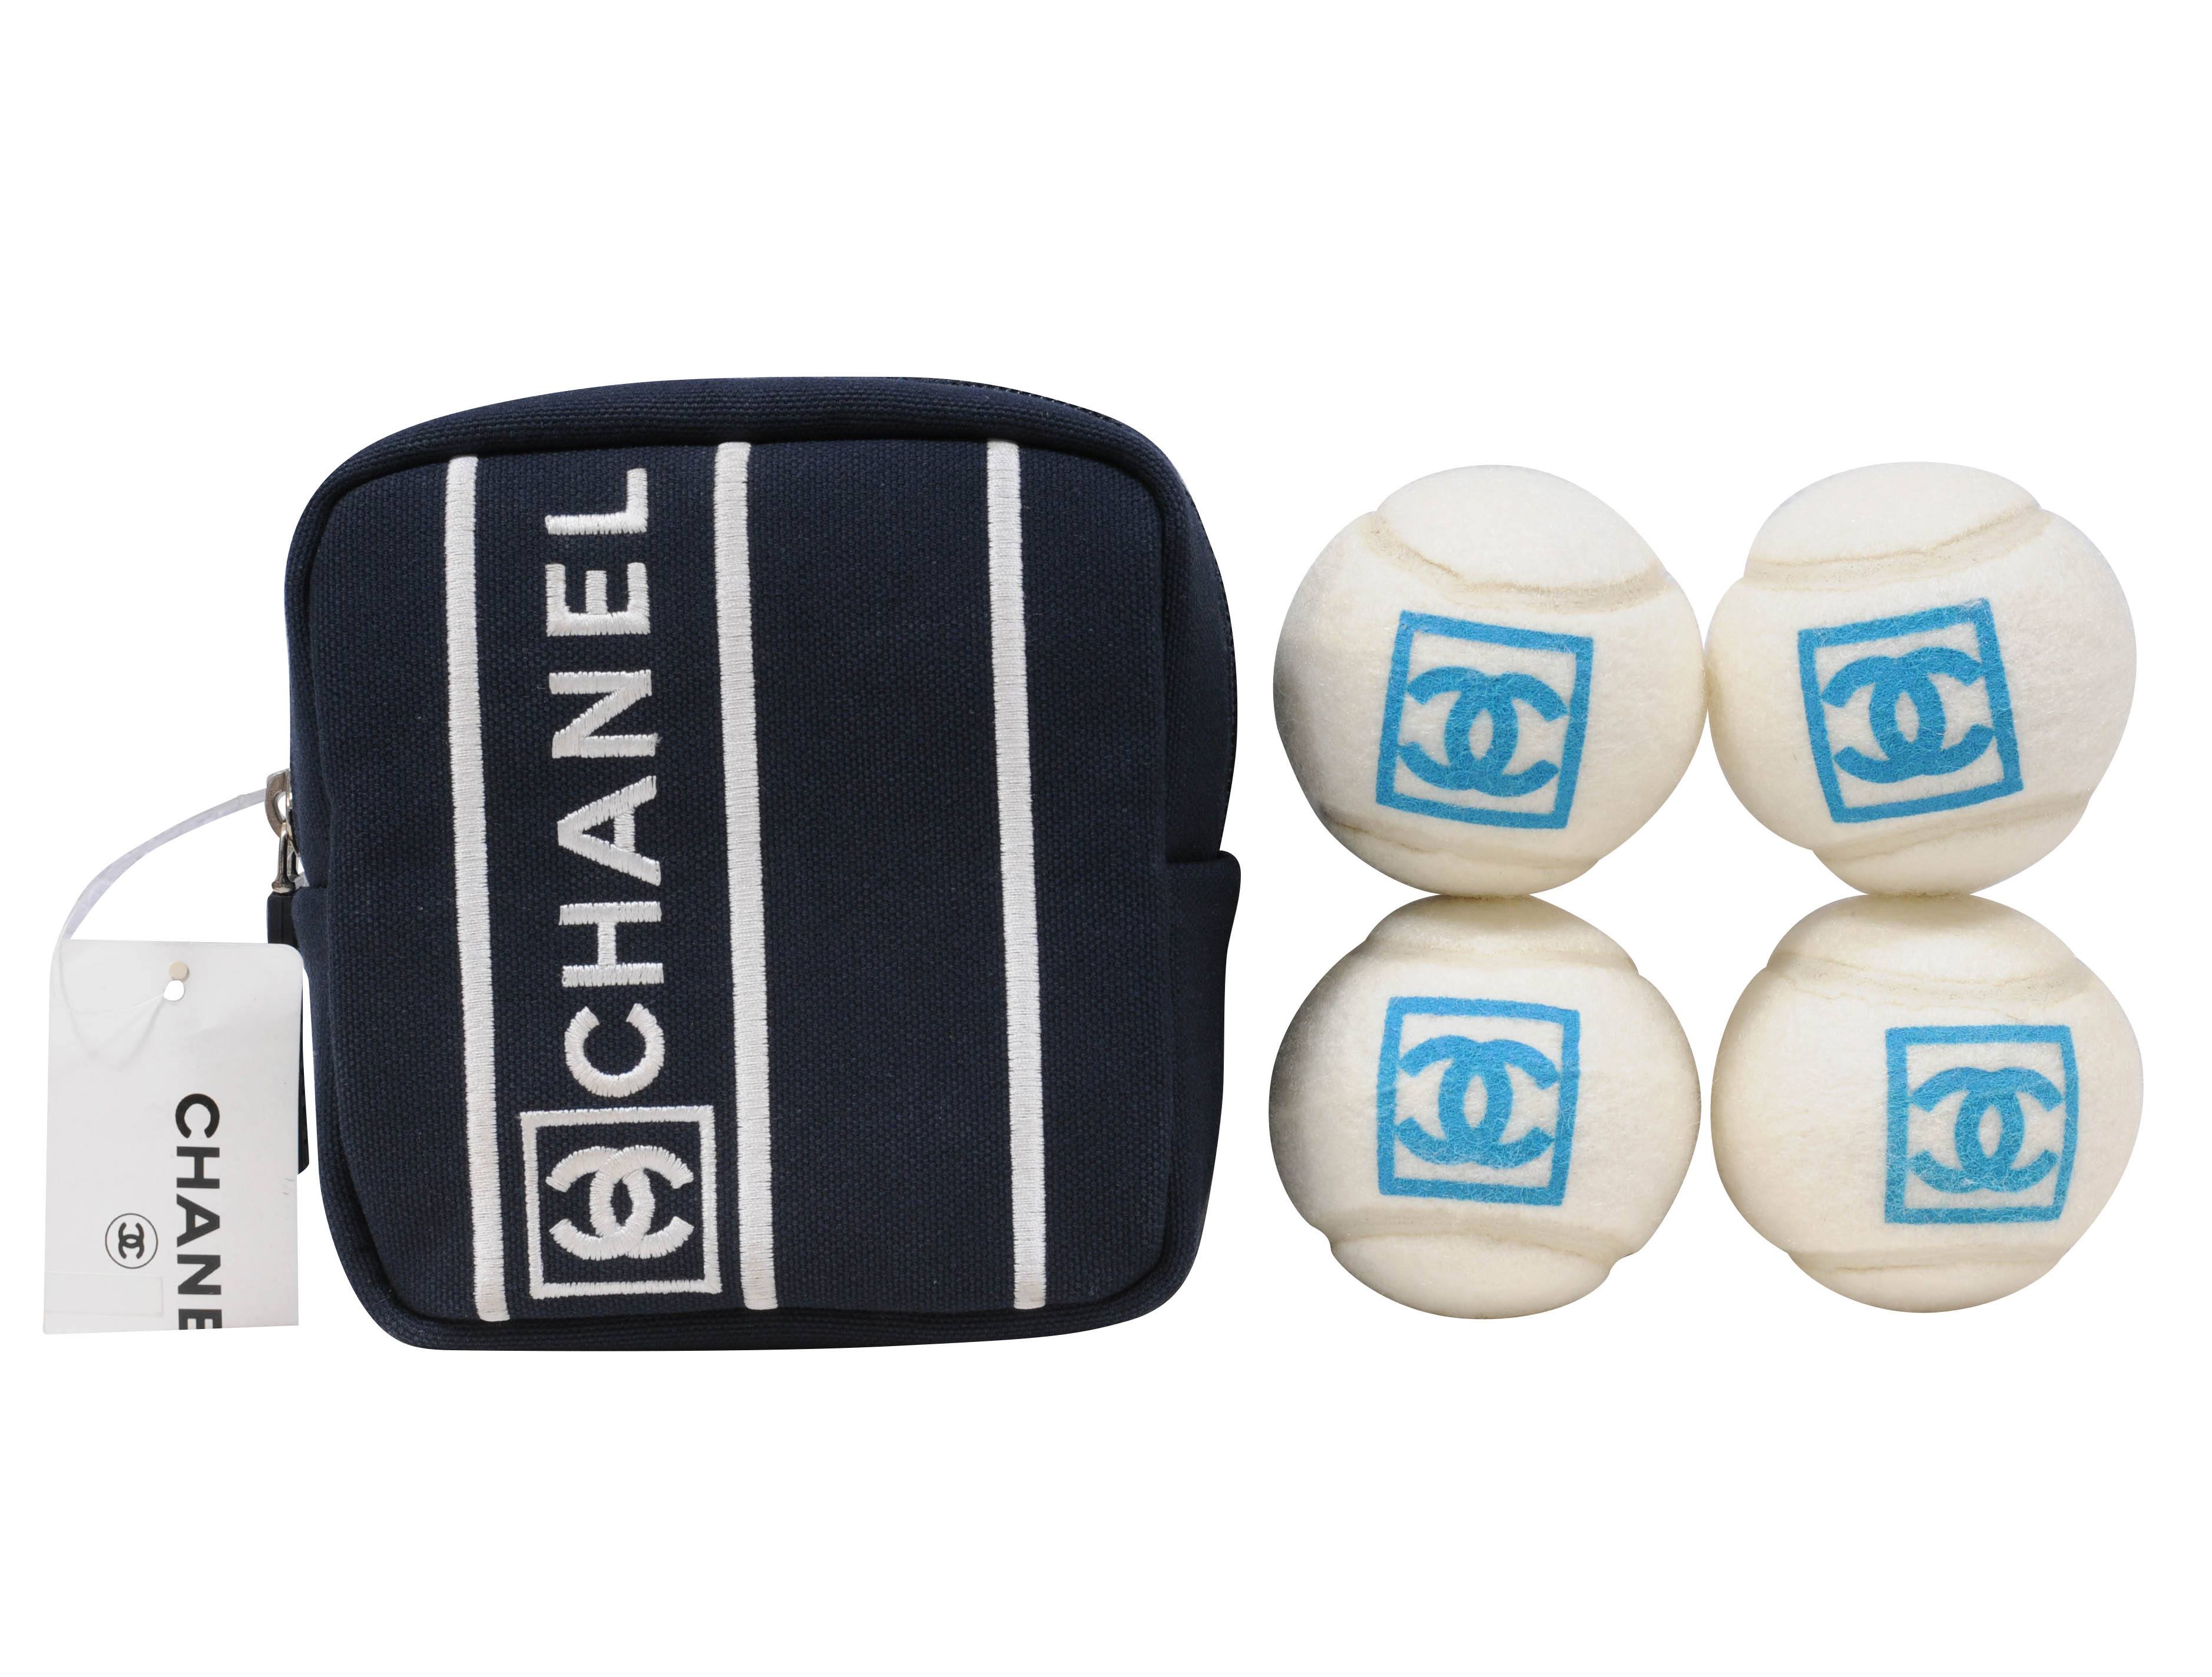 Tennis Chanel Blue in Other - 31294420